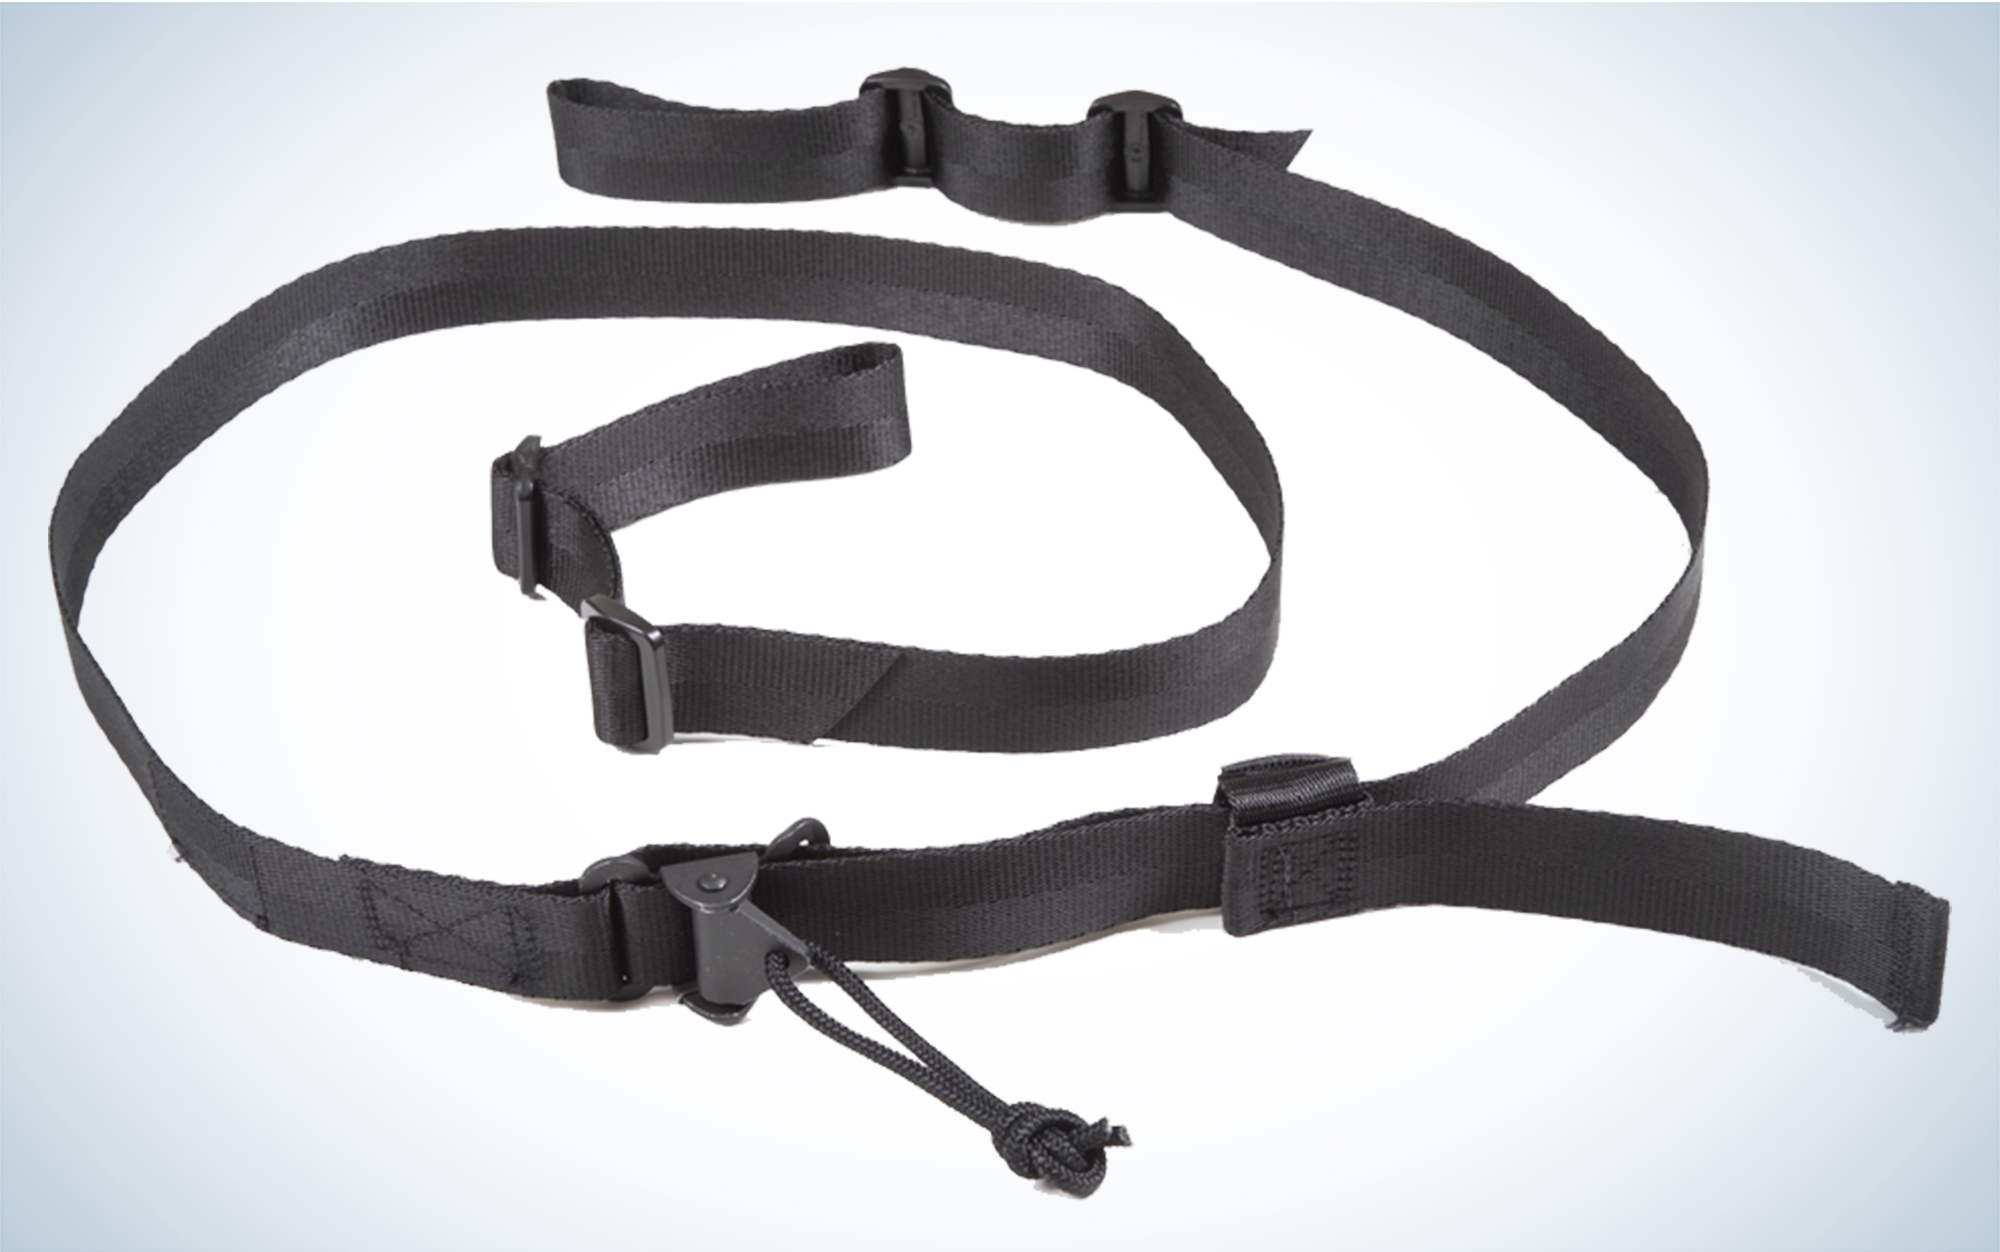 The Viking Tactics Two-Point Padded Sling is the best AR sling.